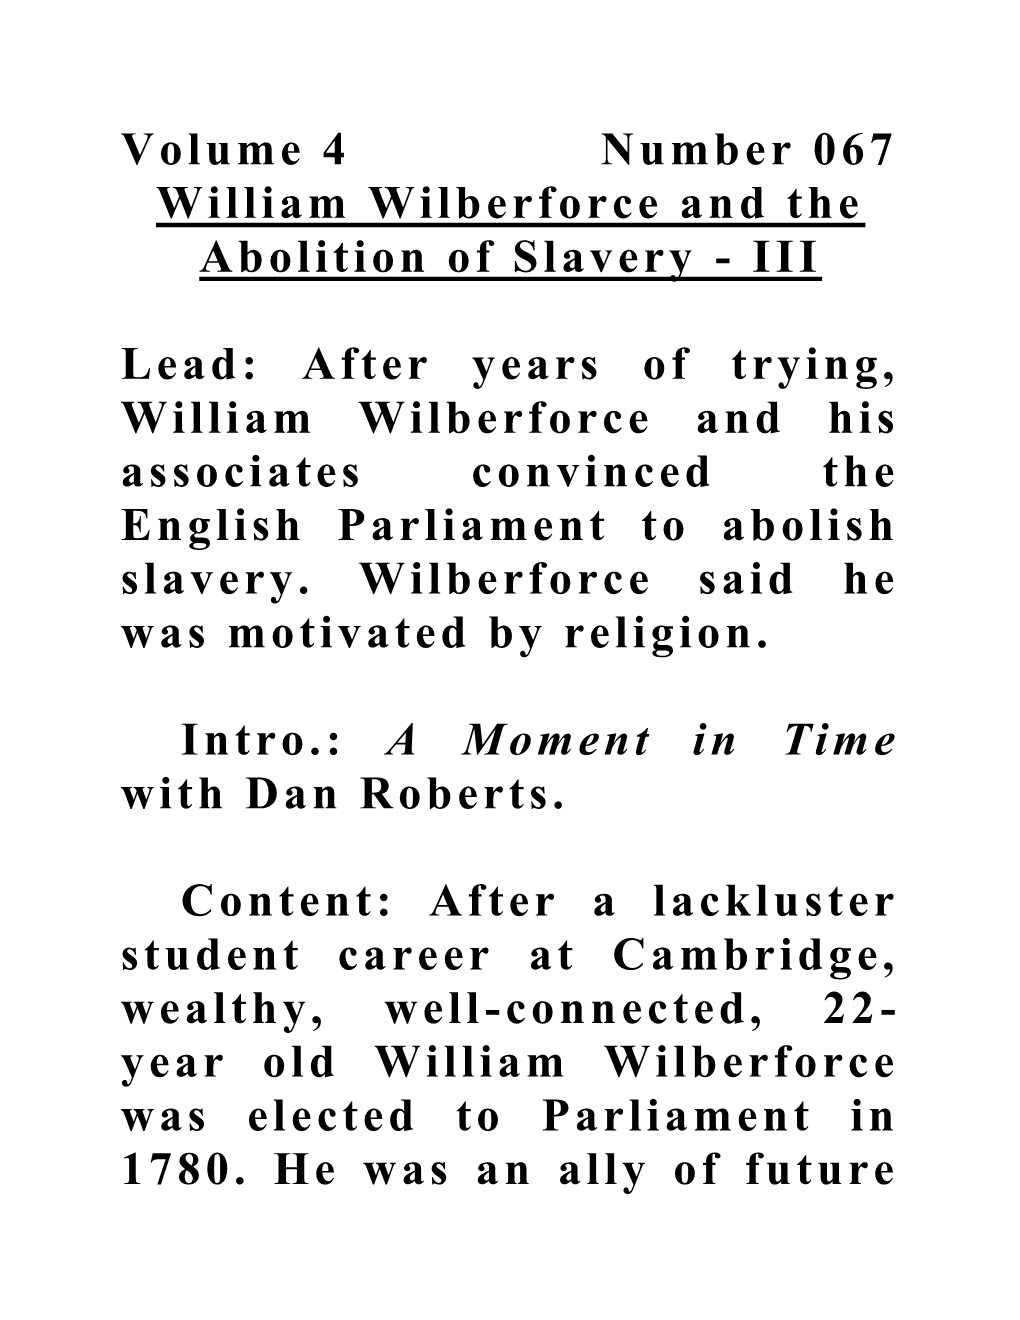 Volume 4 Number 067 William Wilberforce and the Abolition of Slavery - III